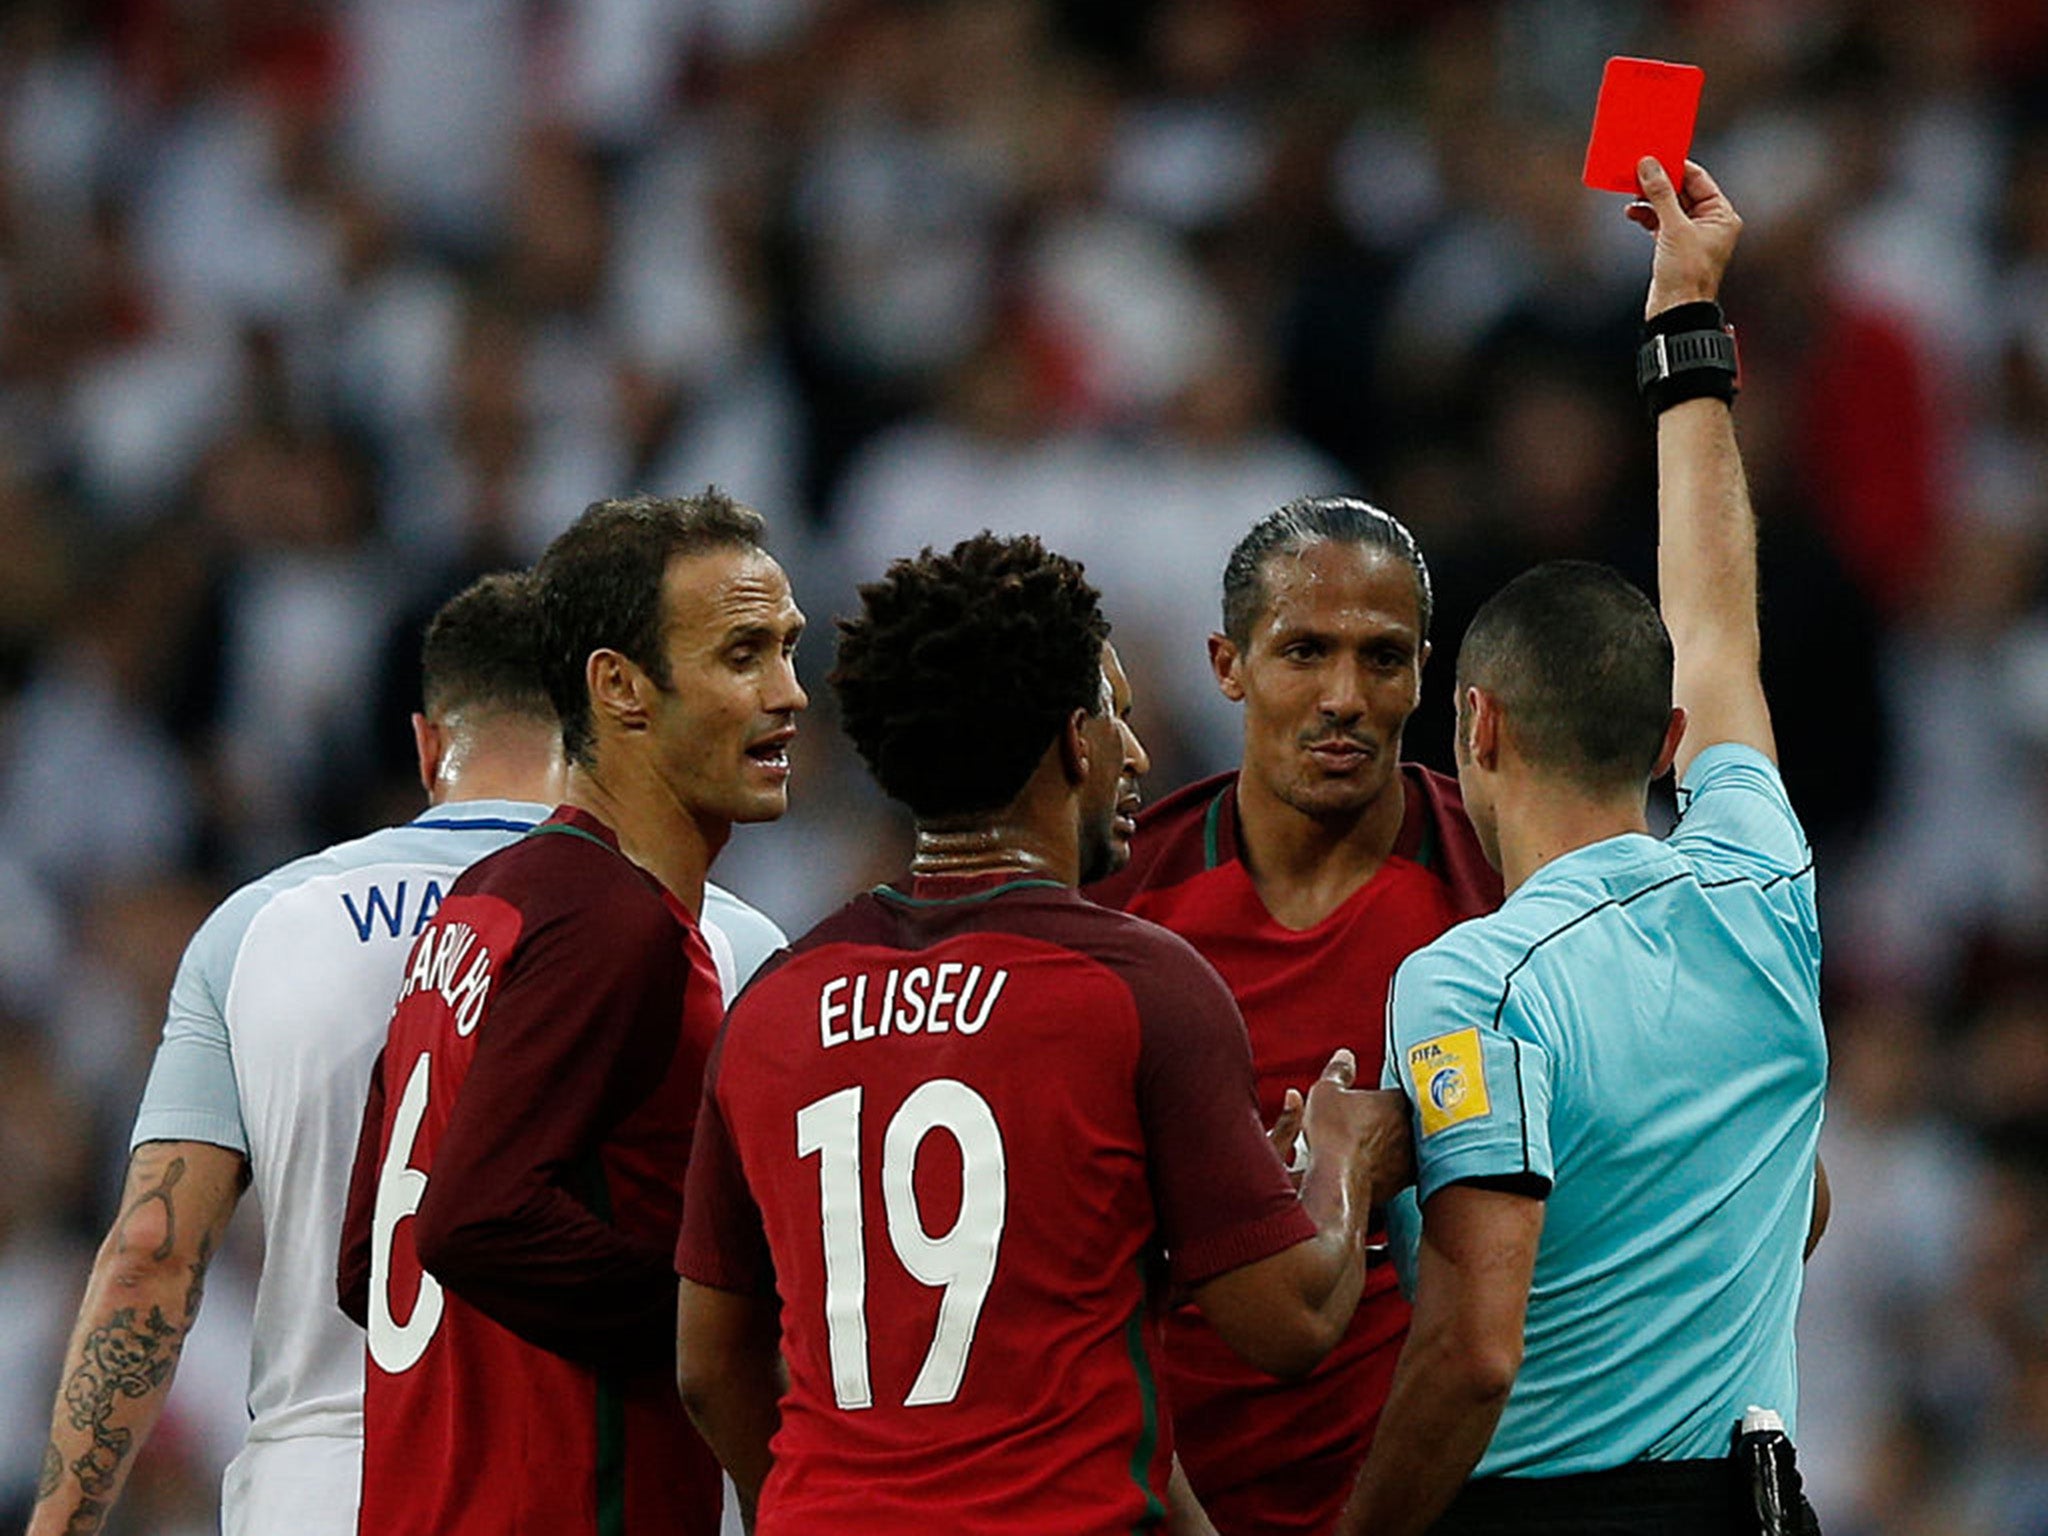 Bruno Alves is sent off in the first half, changing the match